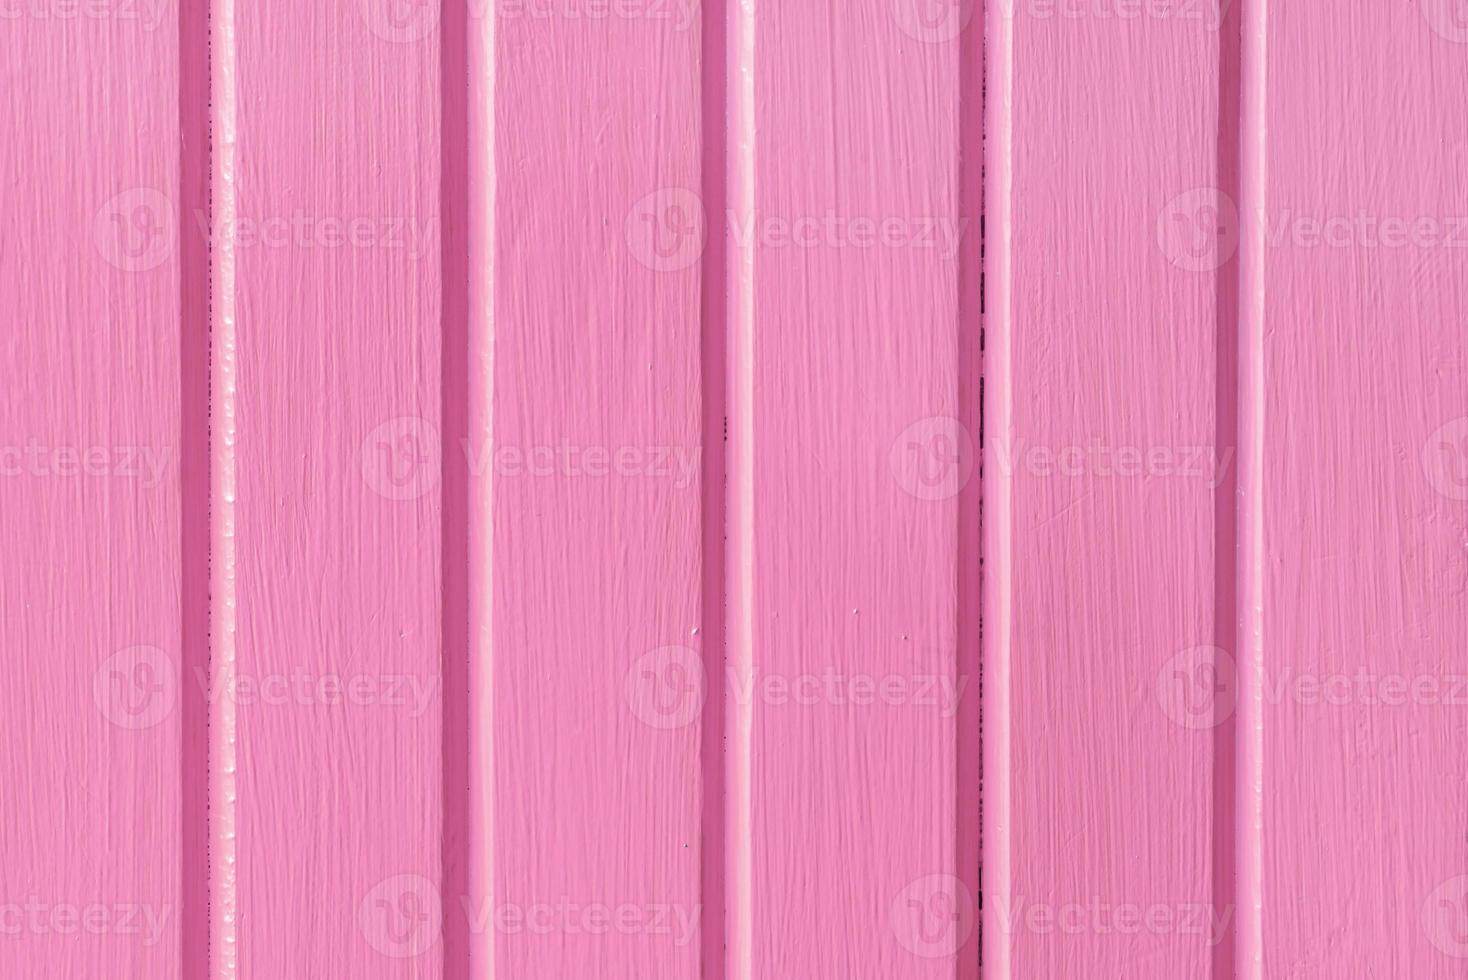 Pink wood plank wall texture background photo